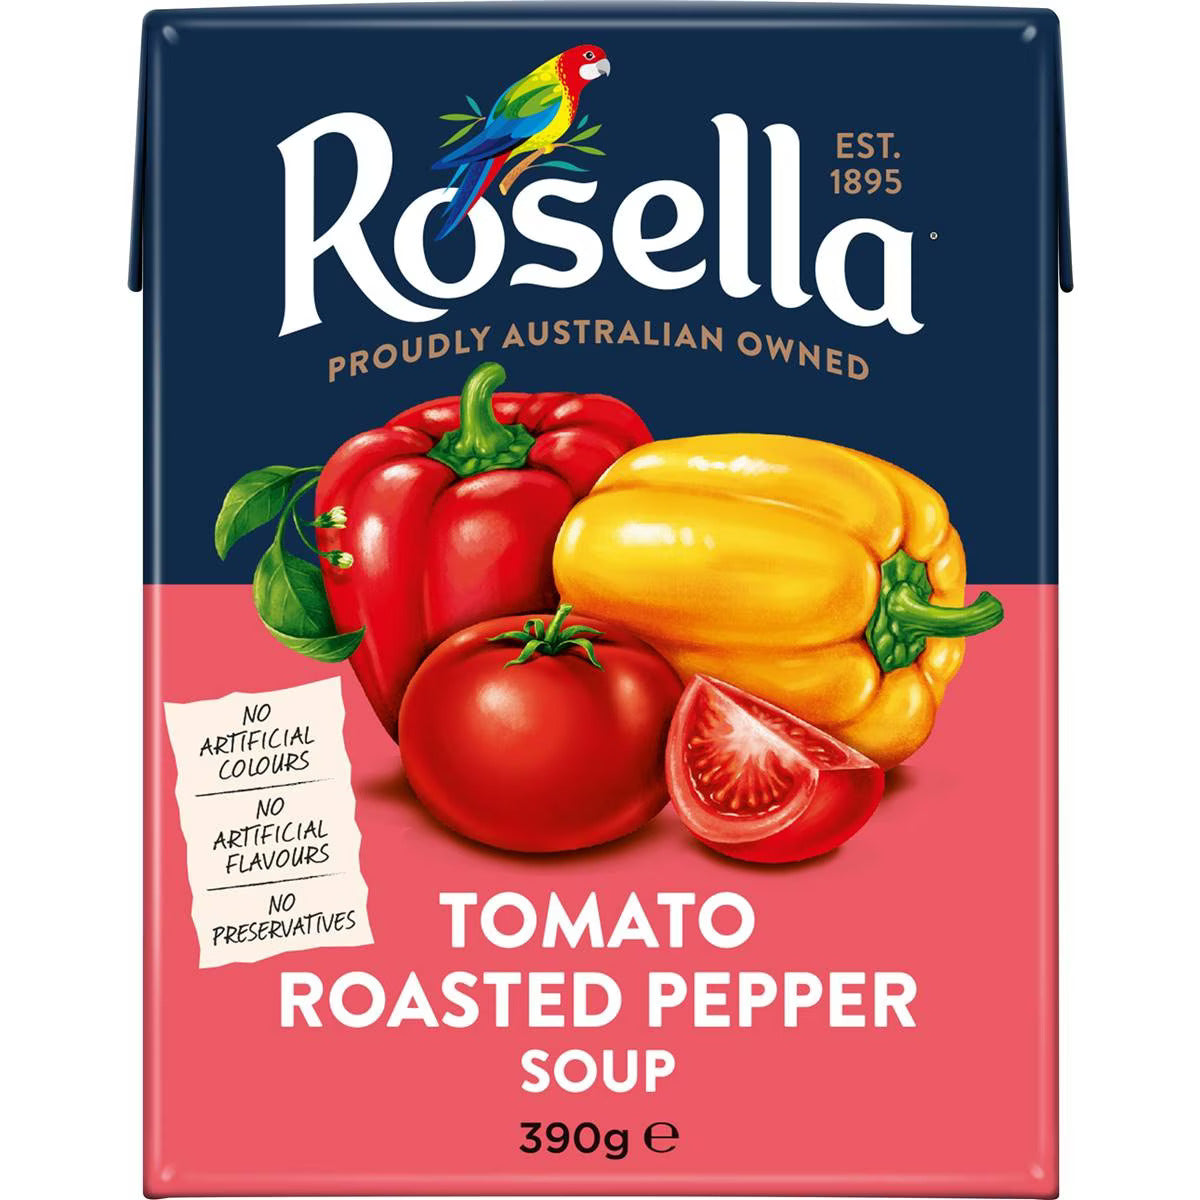 Rosella Tomato and Roasted Pepper Soup 390g